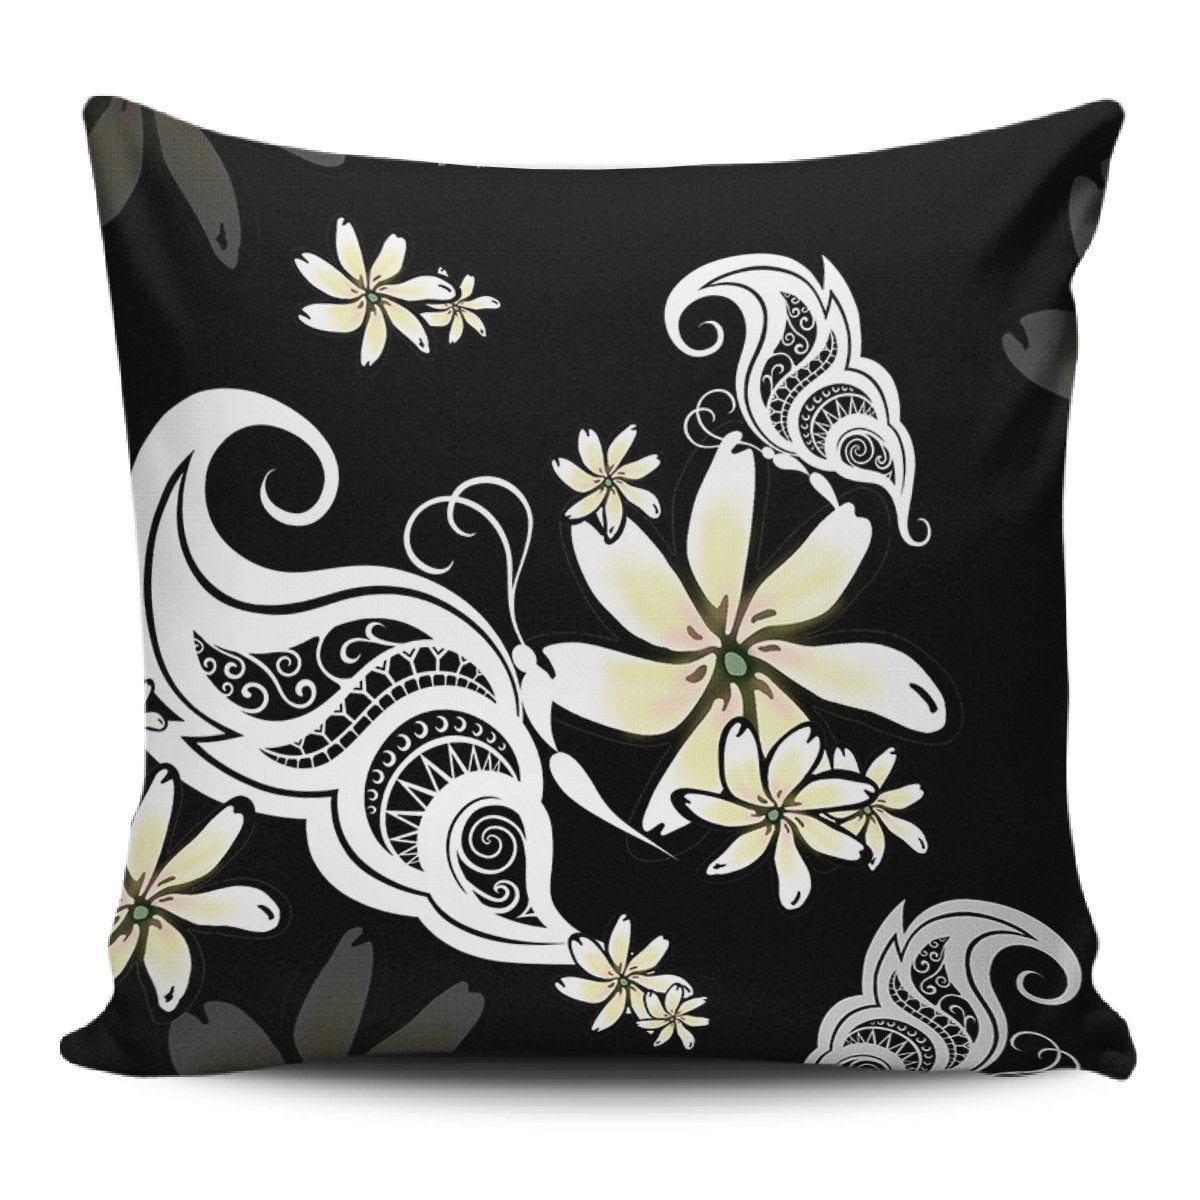 Plumeria Butterfly Pillow Covers One Size Zippered Pillow Case 18"x18"(Twin Sides) Black - Polynesian Pride